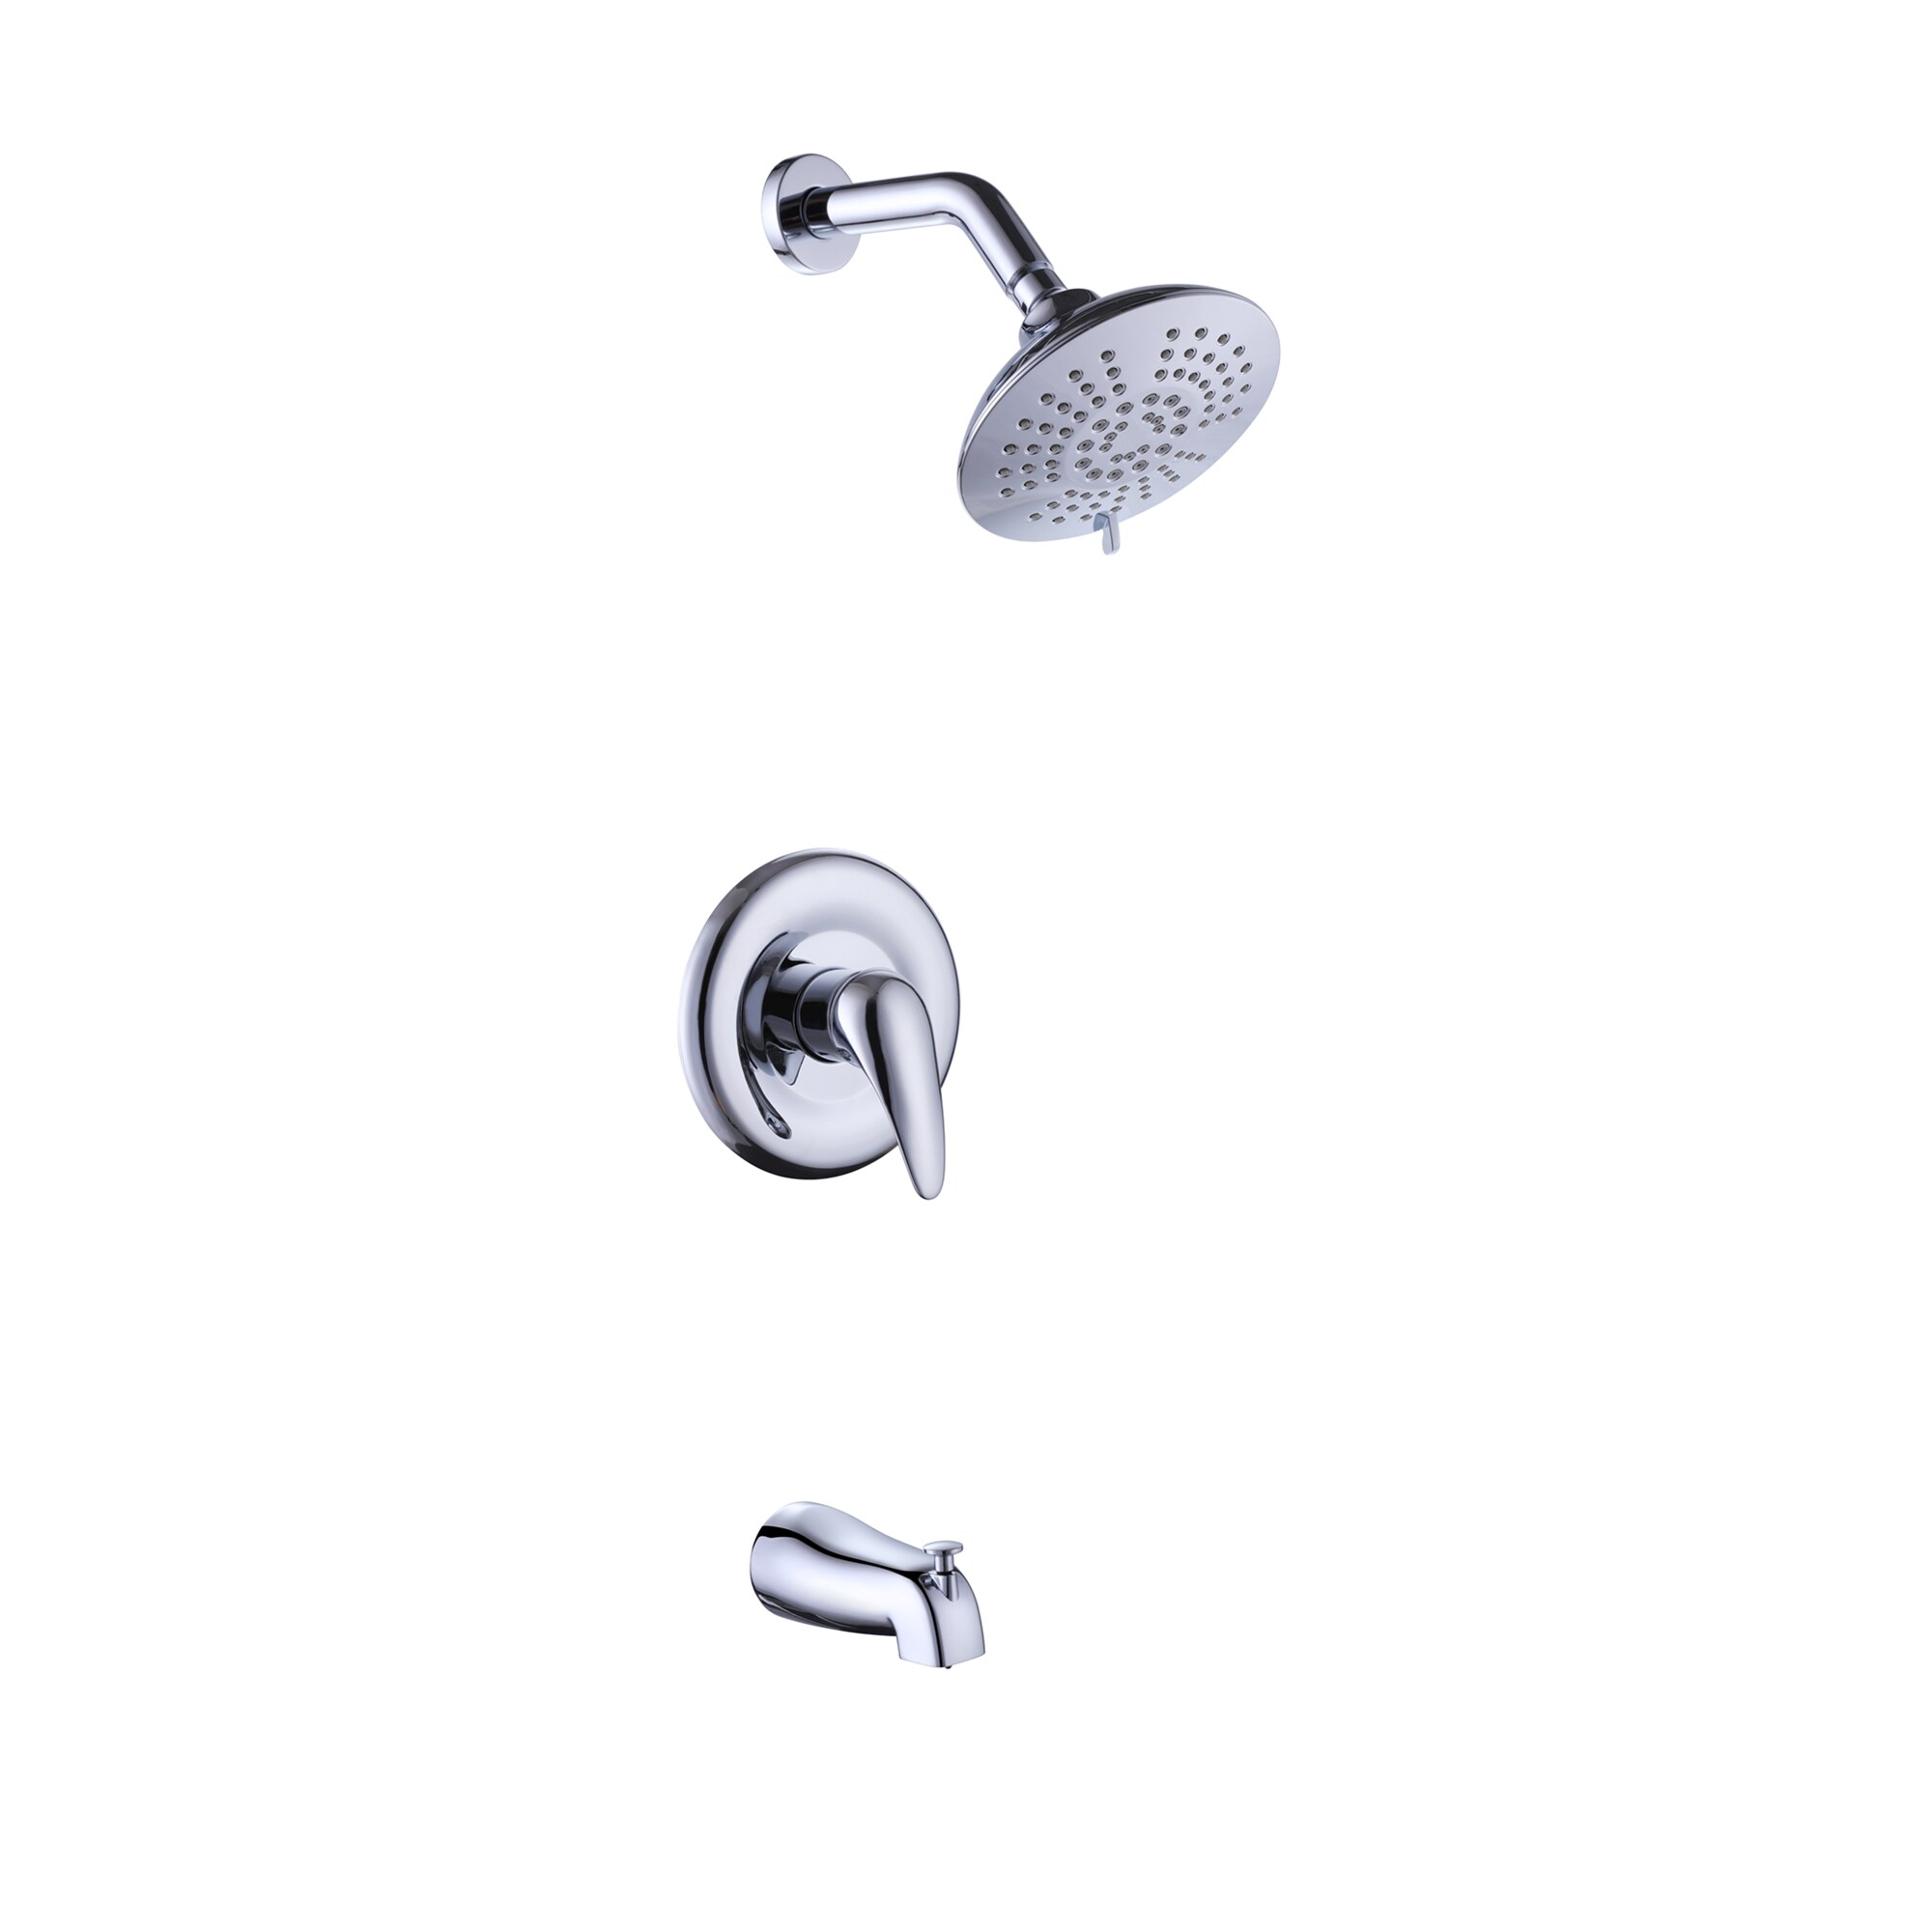 4INCH Spray Tub Bathroom Shower Faucet Kit W/ Hot/Cold Control Handle Valve 